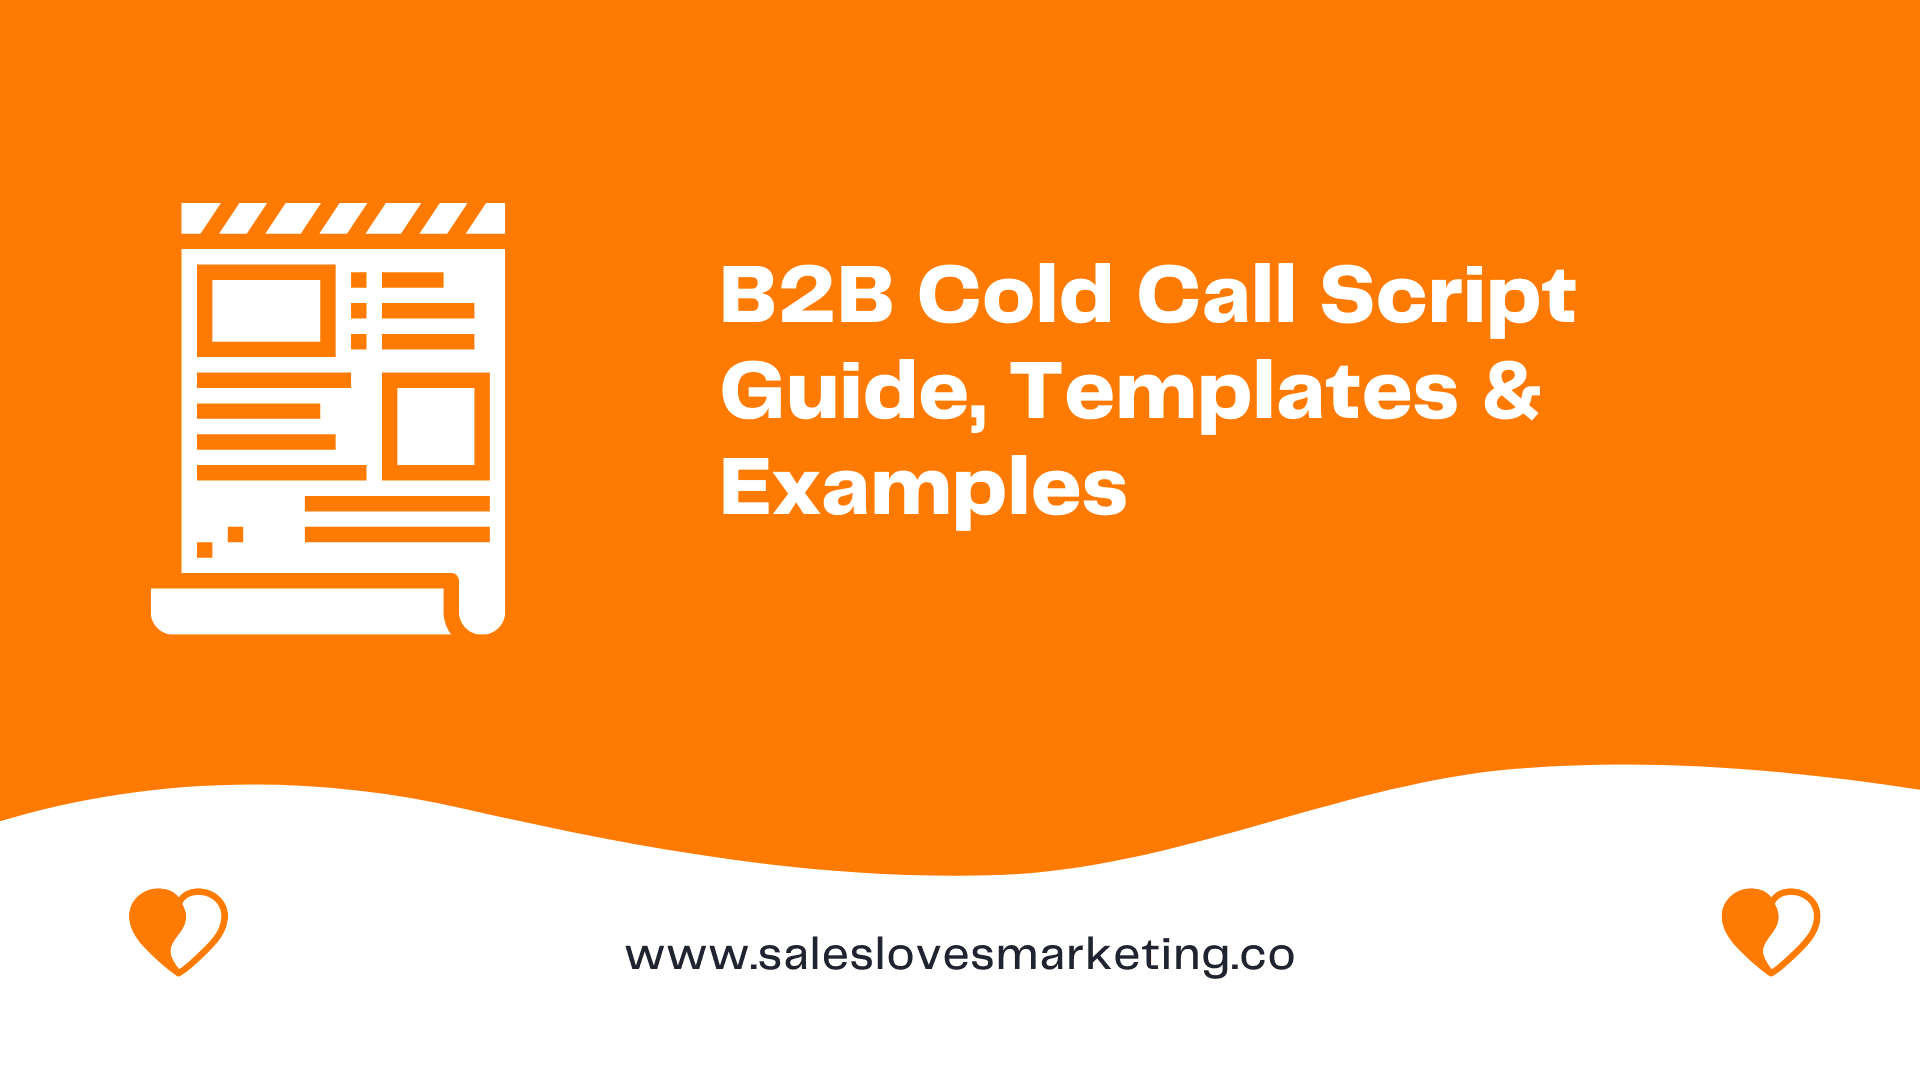 B2B Cold Call Script Guide, Templates & Examples